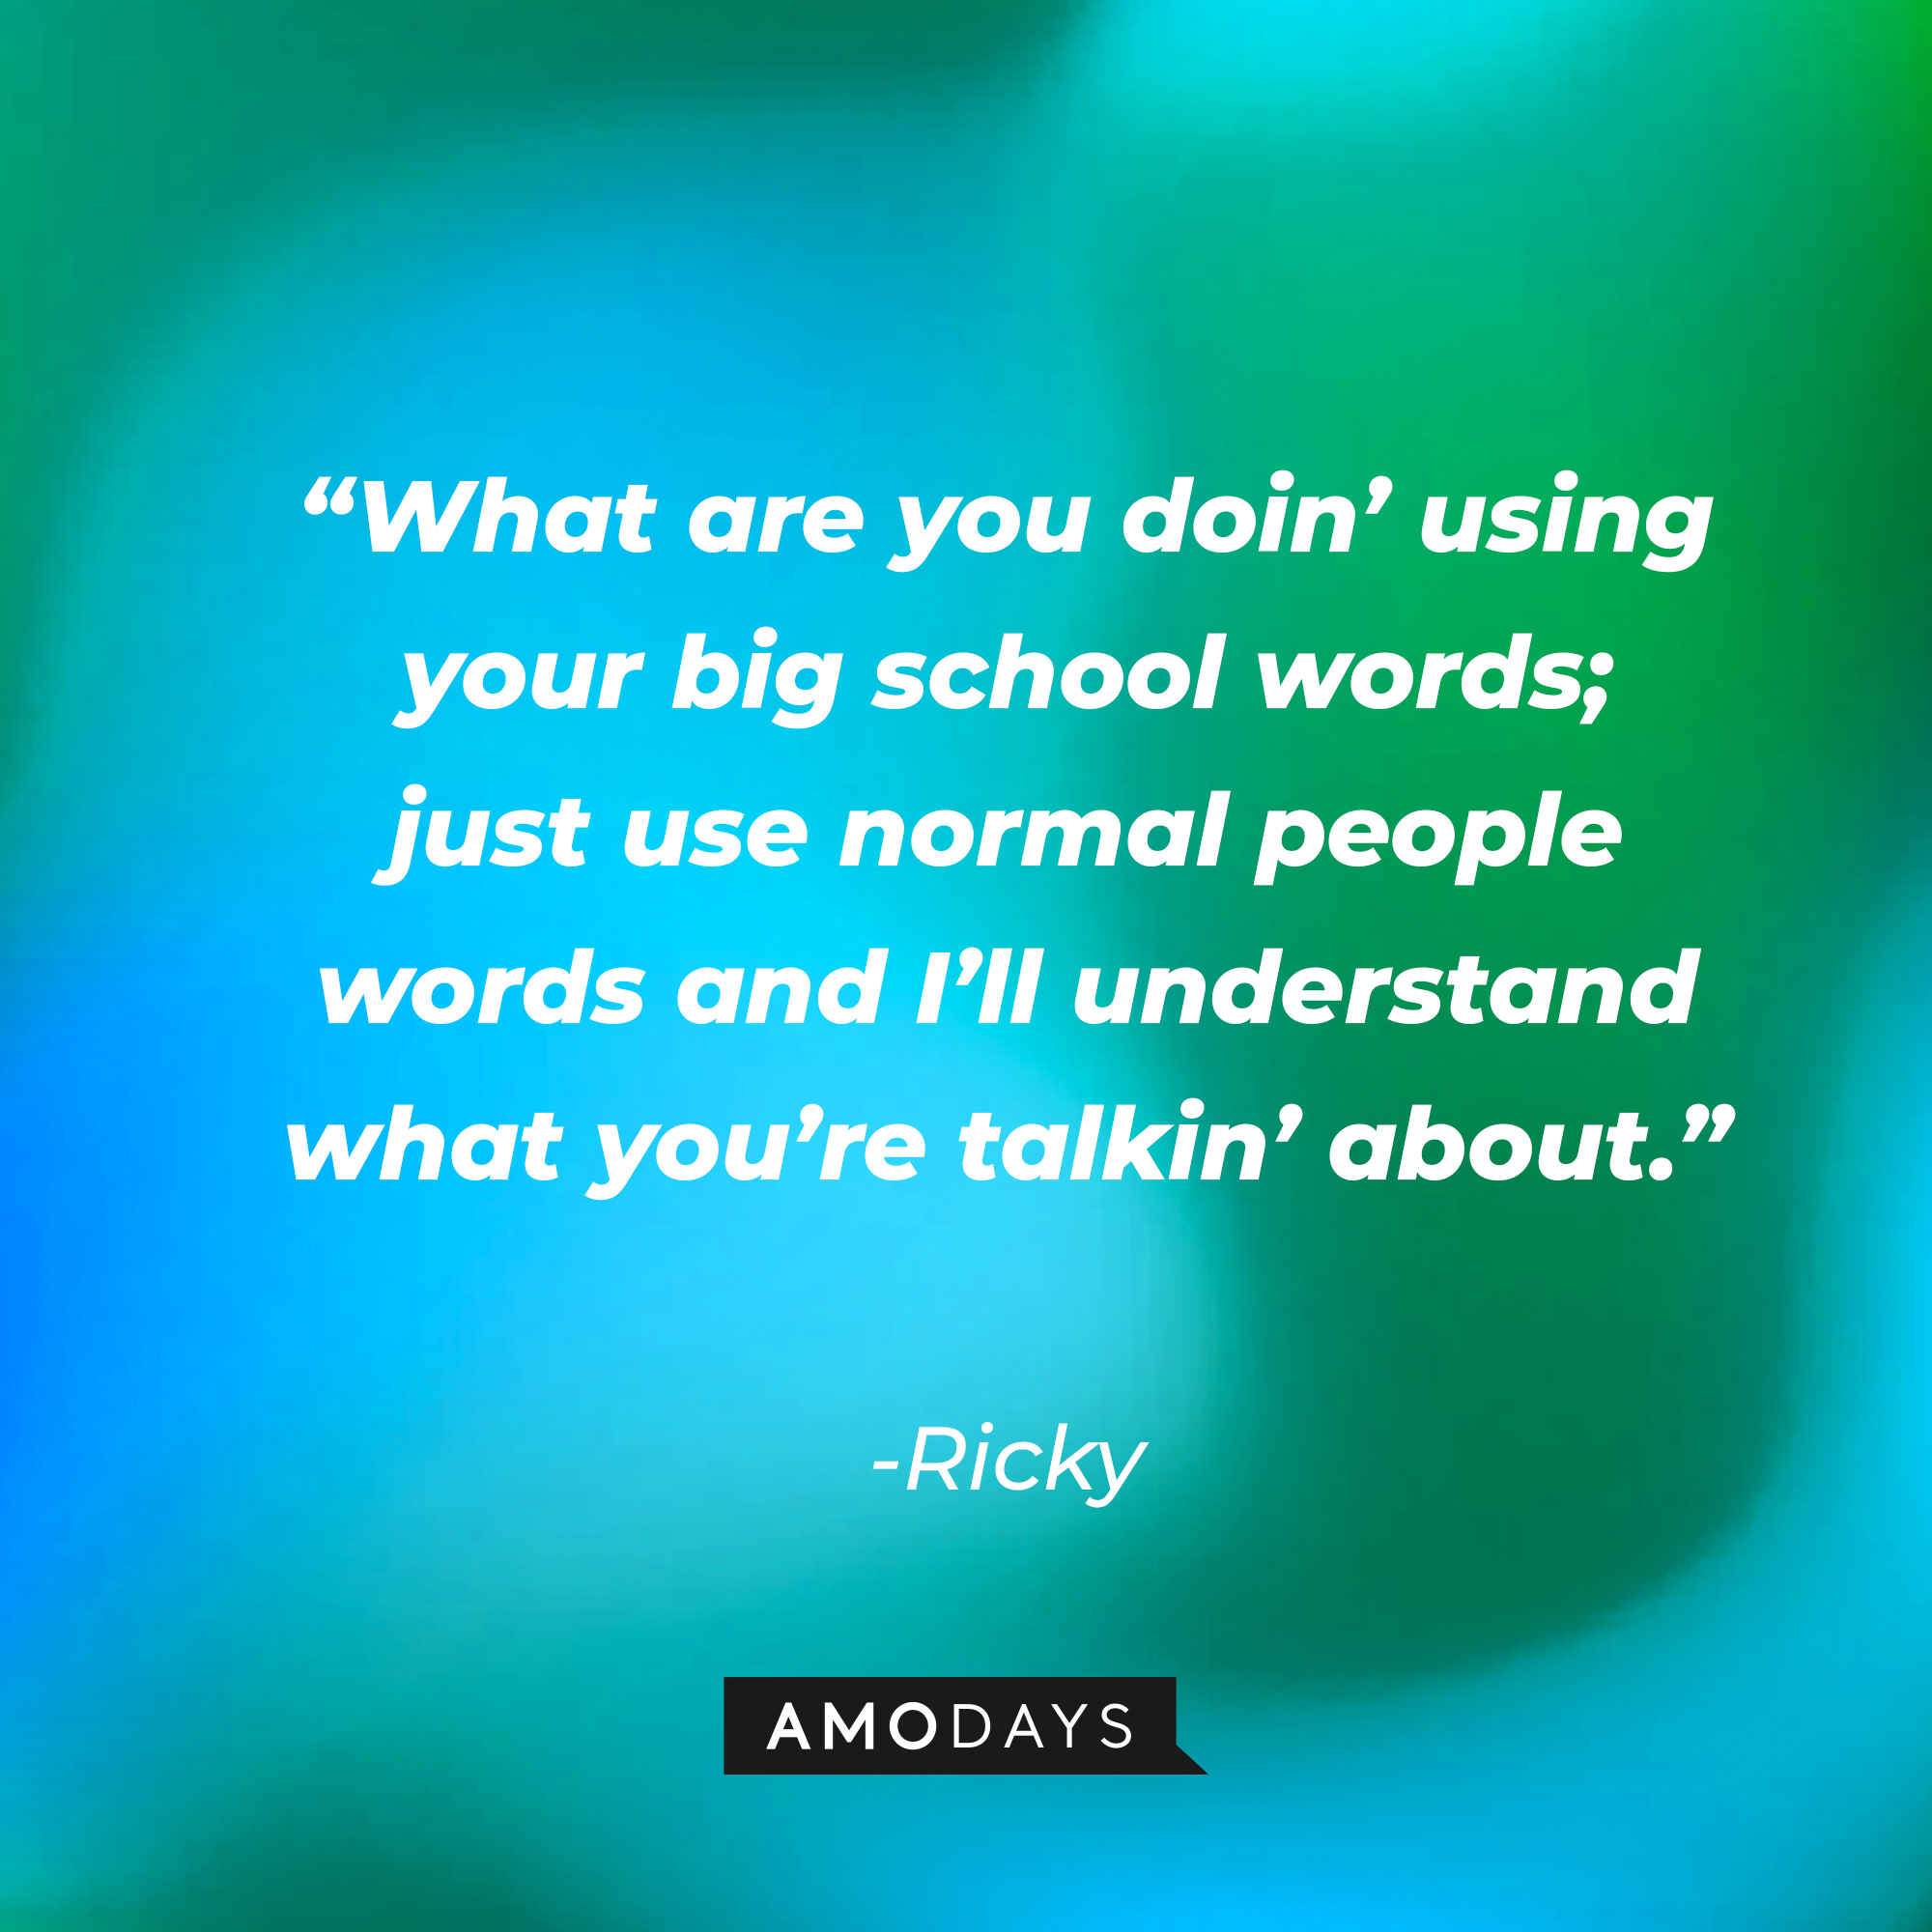 Ricky's quote: “What are you doin’ using your big school words; just use normal people words and I’ll understand what you’re talkin’ about.” | Source: Amodays